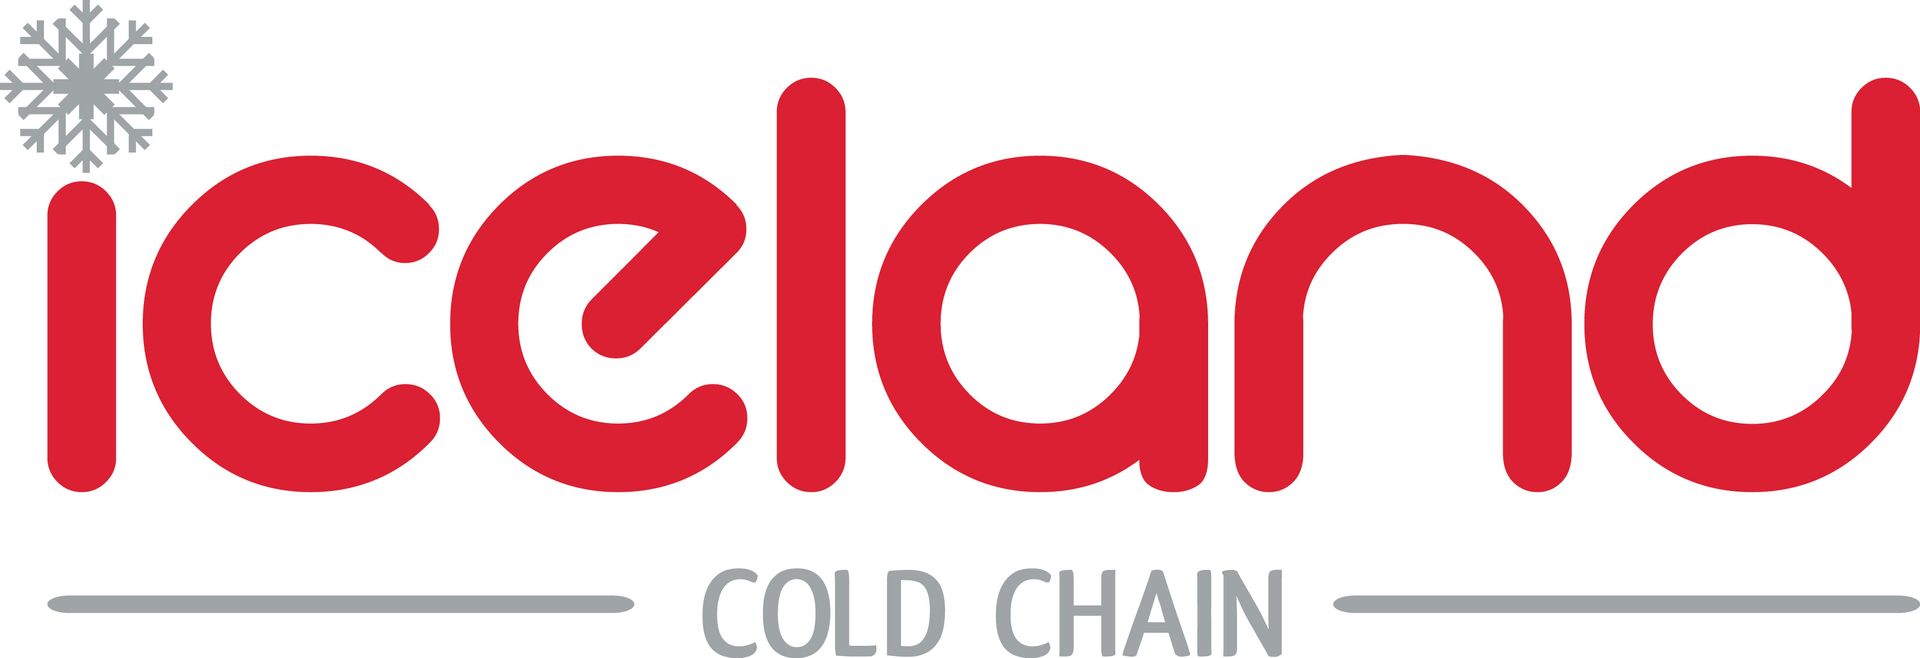 Iceland Cold Chain logo